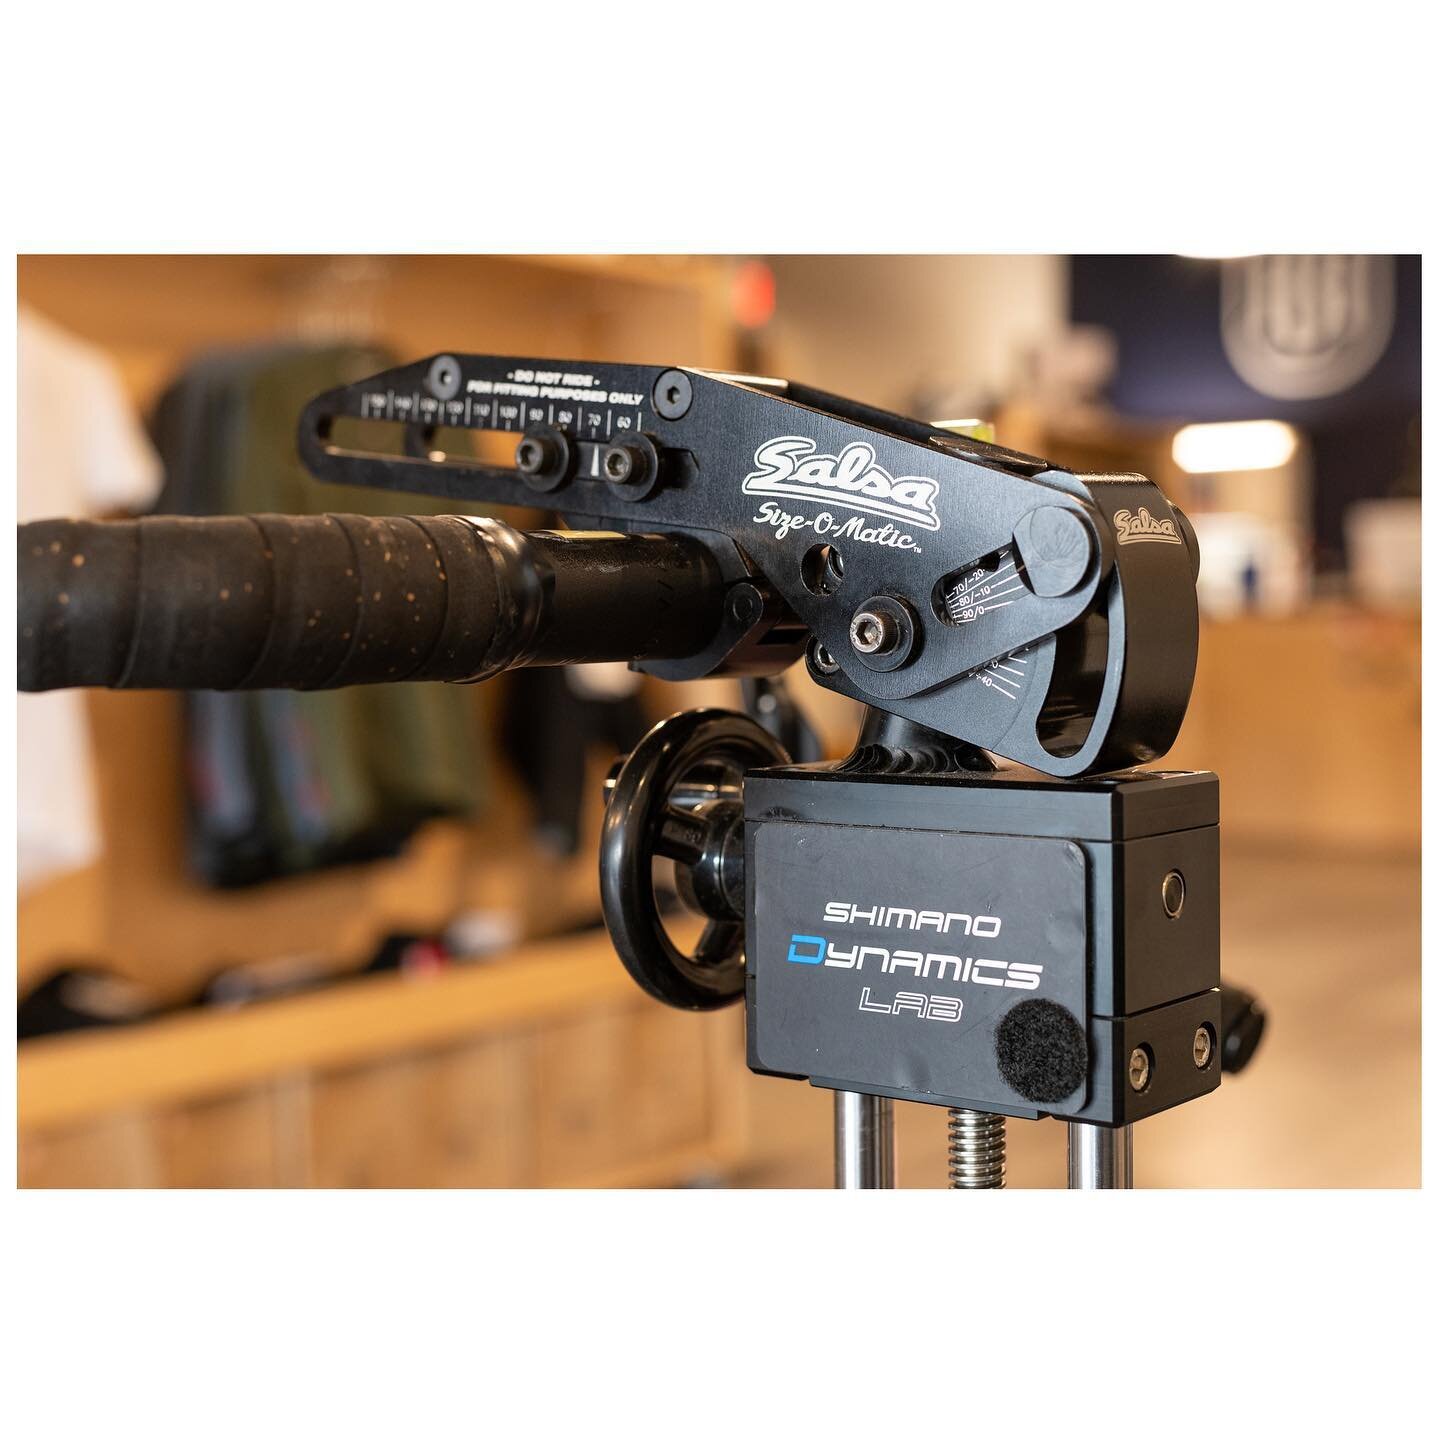 Not only does it have an amazing name, the @salsacycles Size-O-Matic is an indispensable tool for the one piece bar/stem combos that are becoming more and more prevalent on new bikes. 

In conjunction with our fit bike, we can simulate any bikes geom